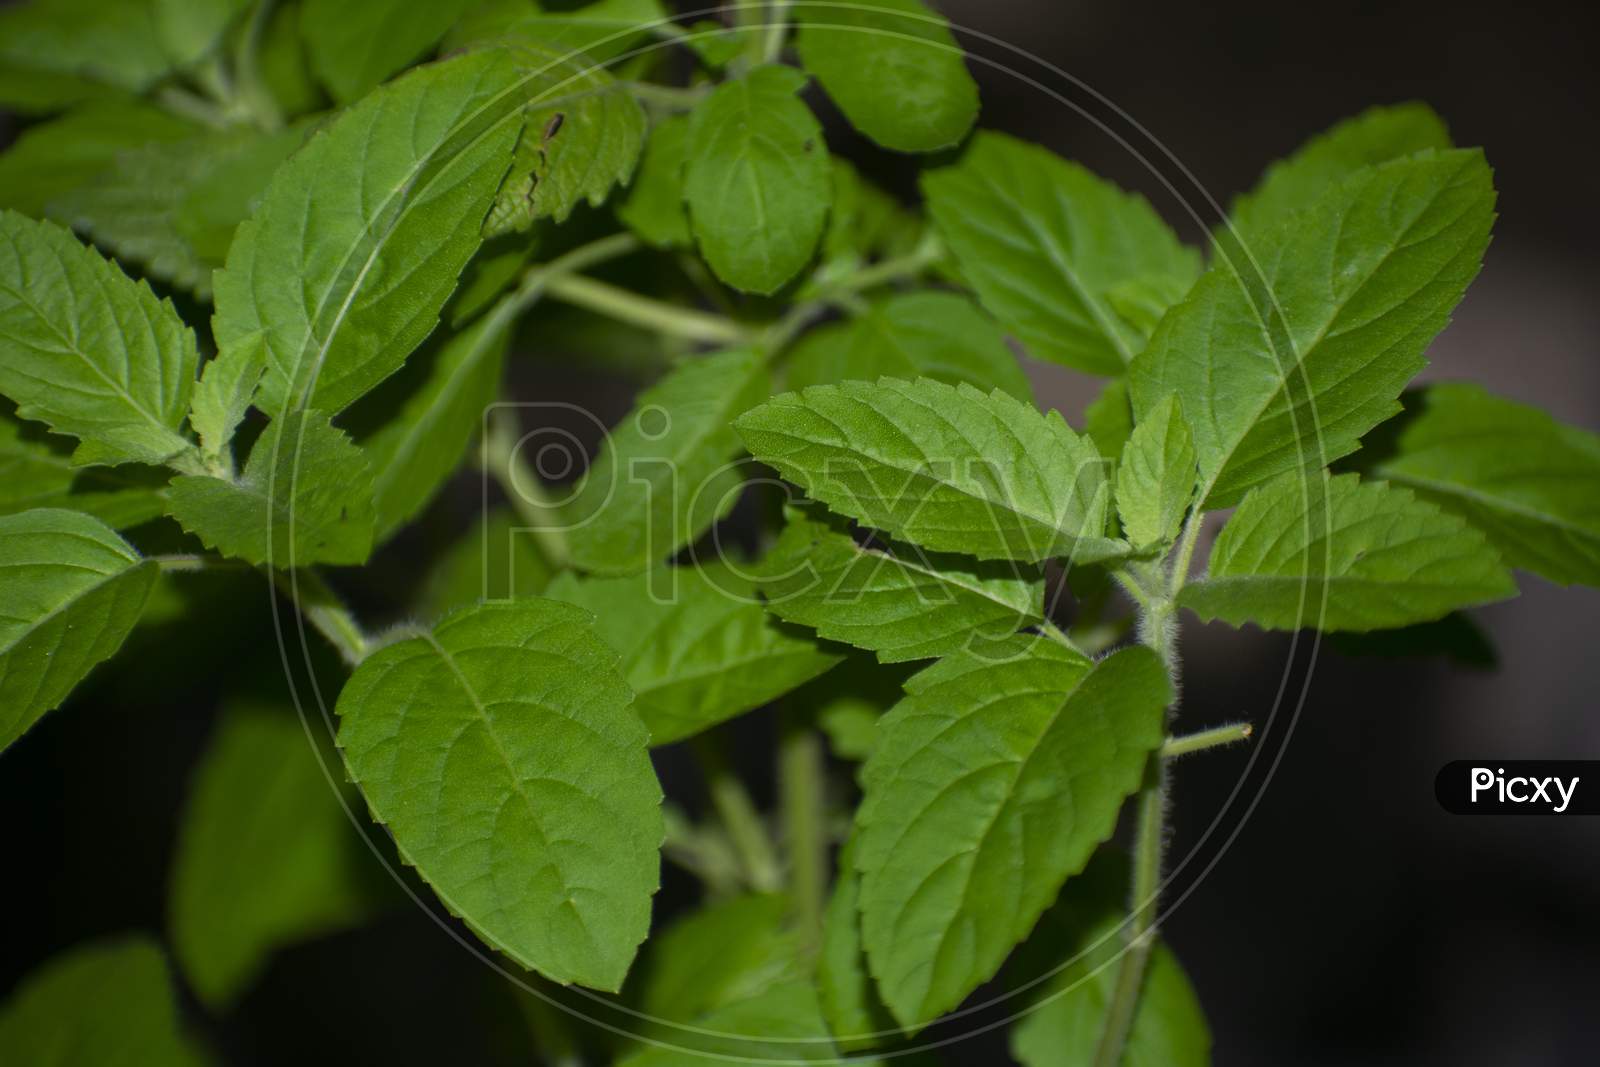 Tulsi Or Ocimum Sanctum, Also Known As Holy Basil, Is A Medicinal Herb Used In Ayurveda, A Form Of Alternative Medicine That Originated In India